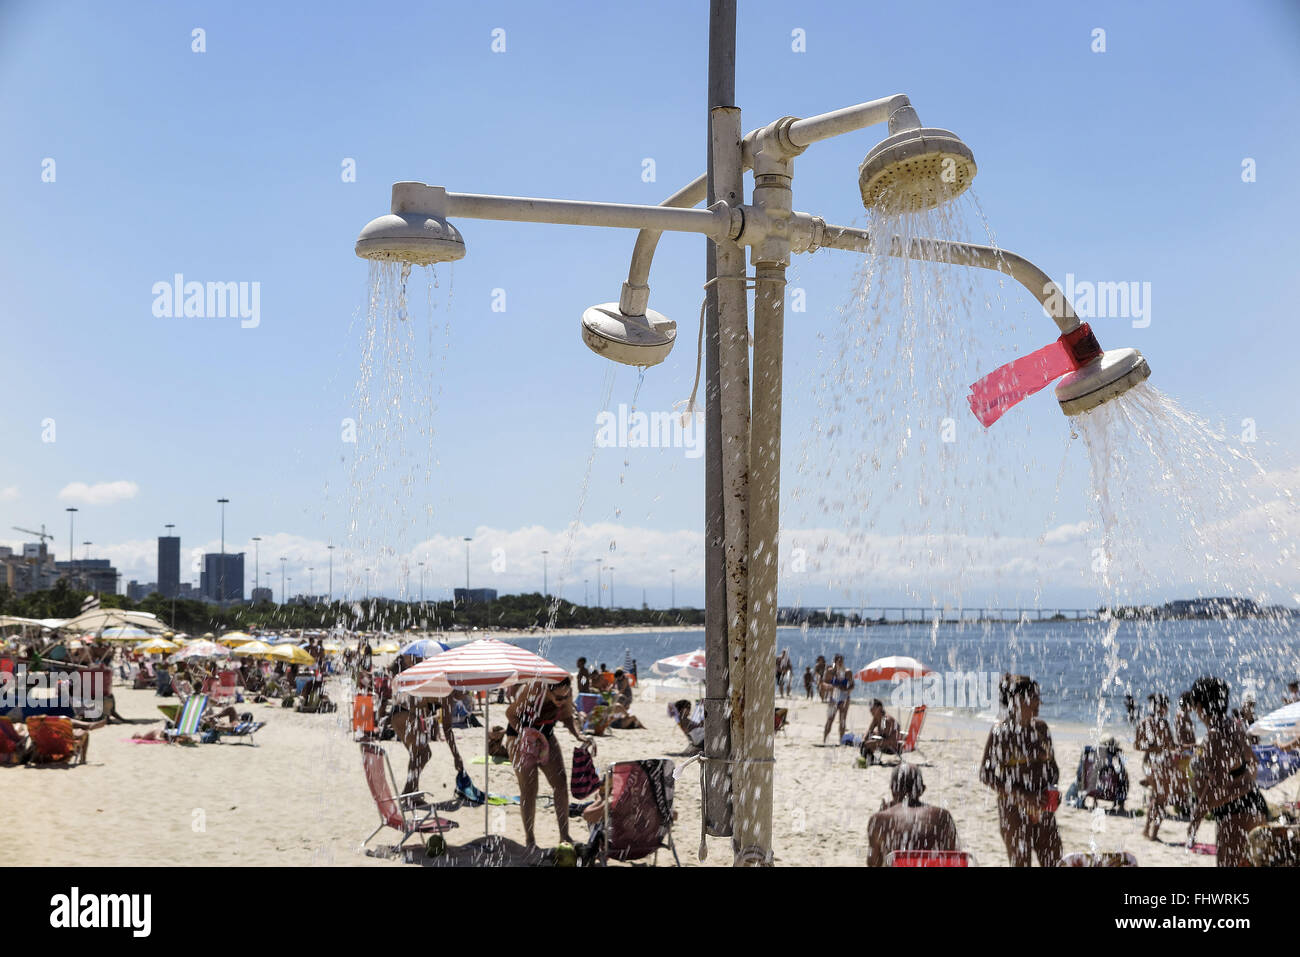 Waste water in showers at Praia do Flamengo Stock Photo